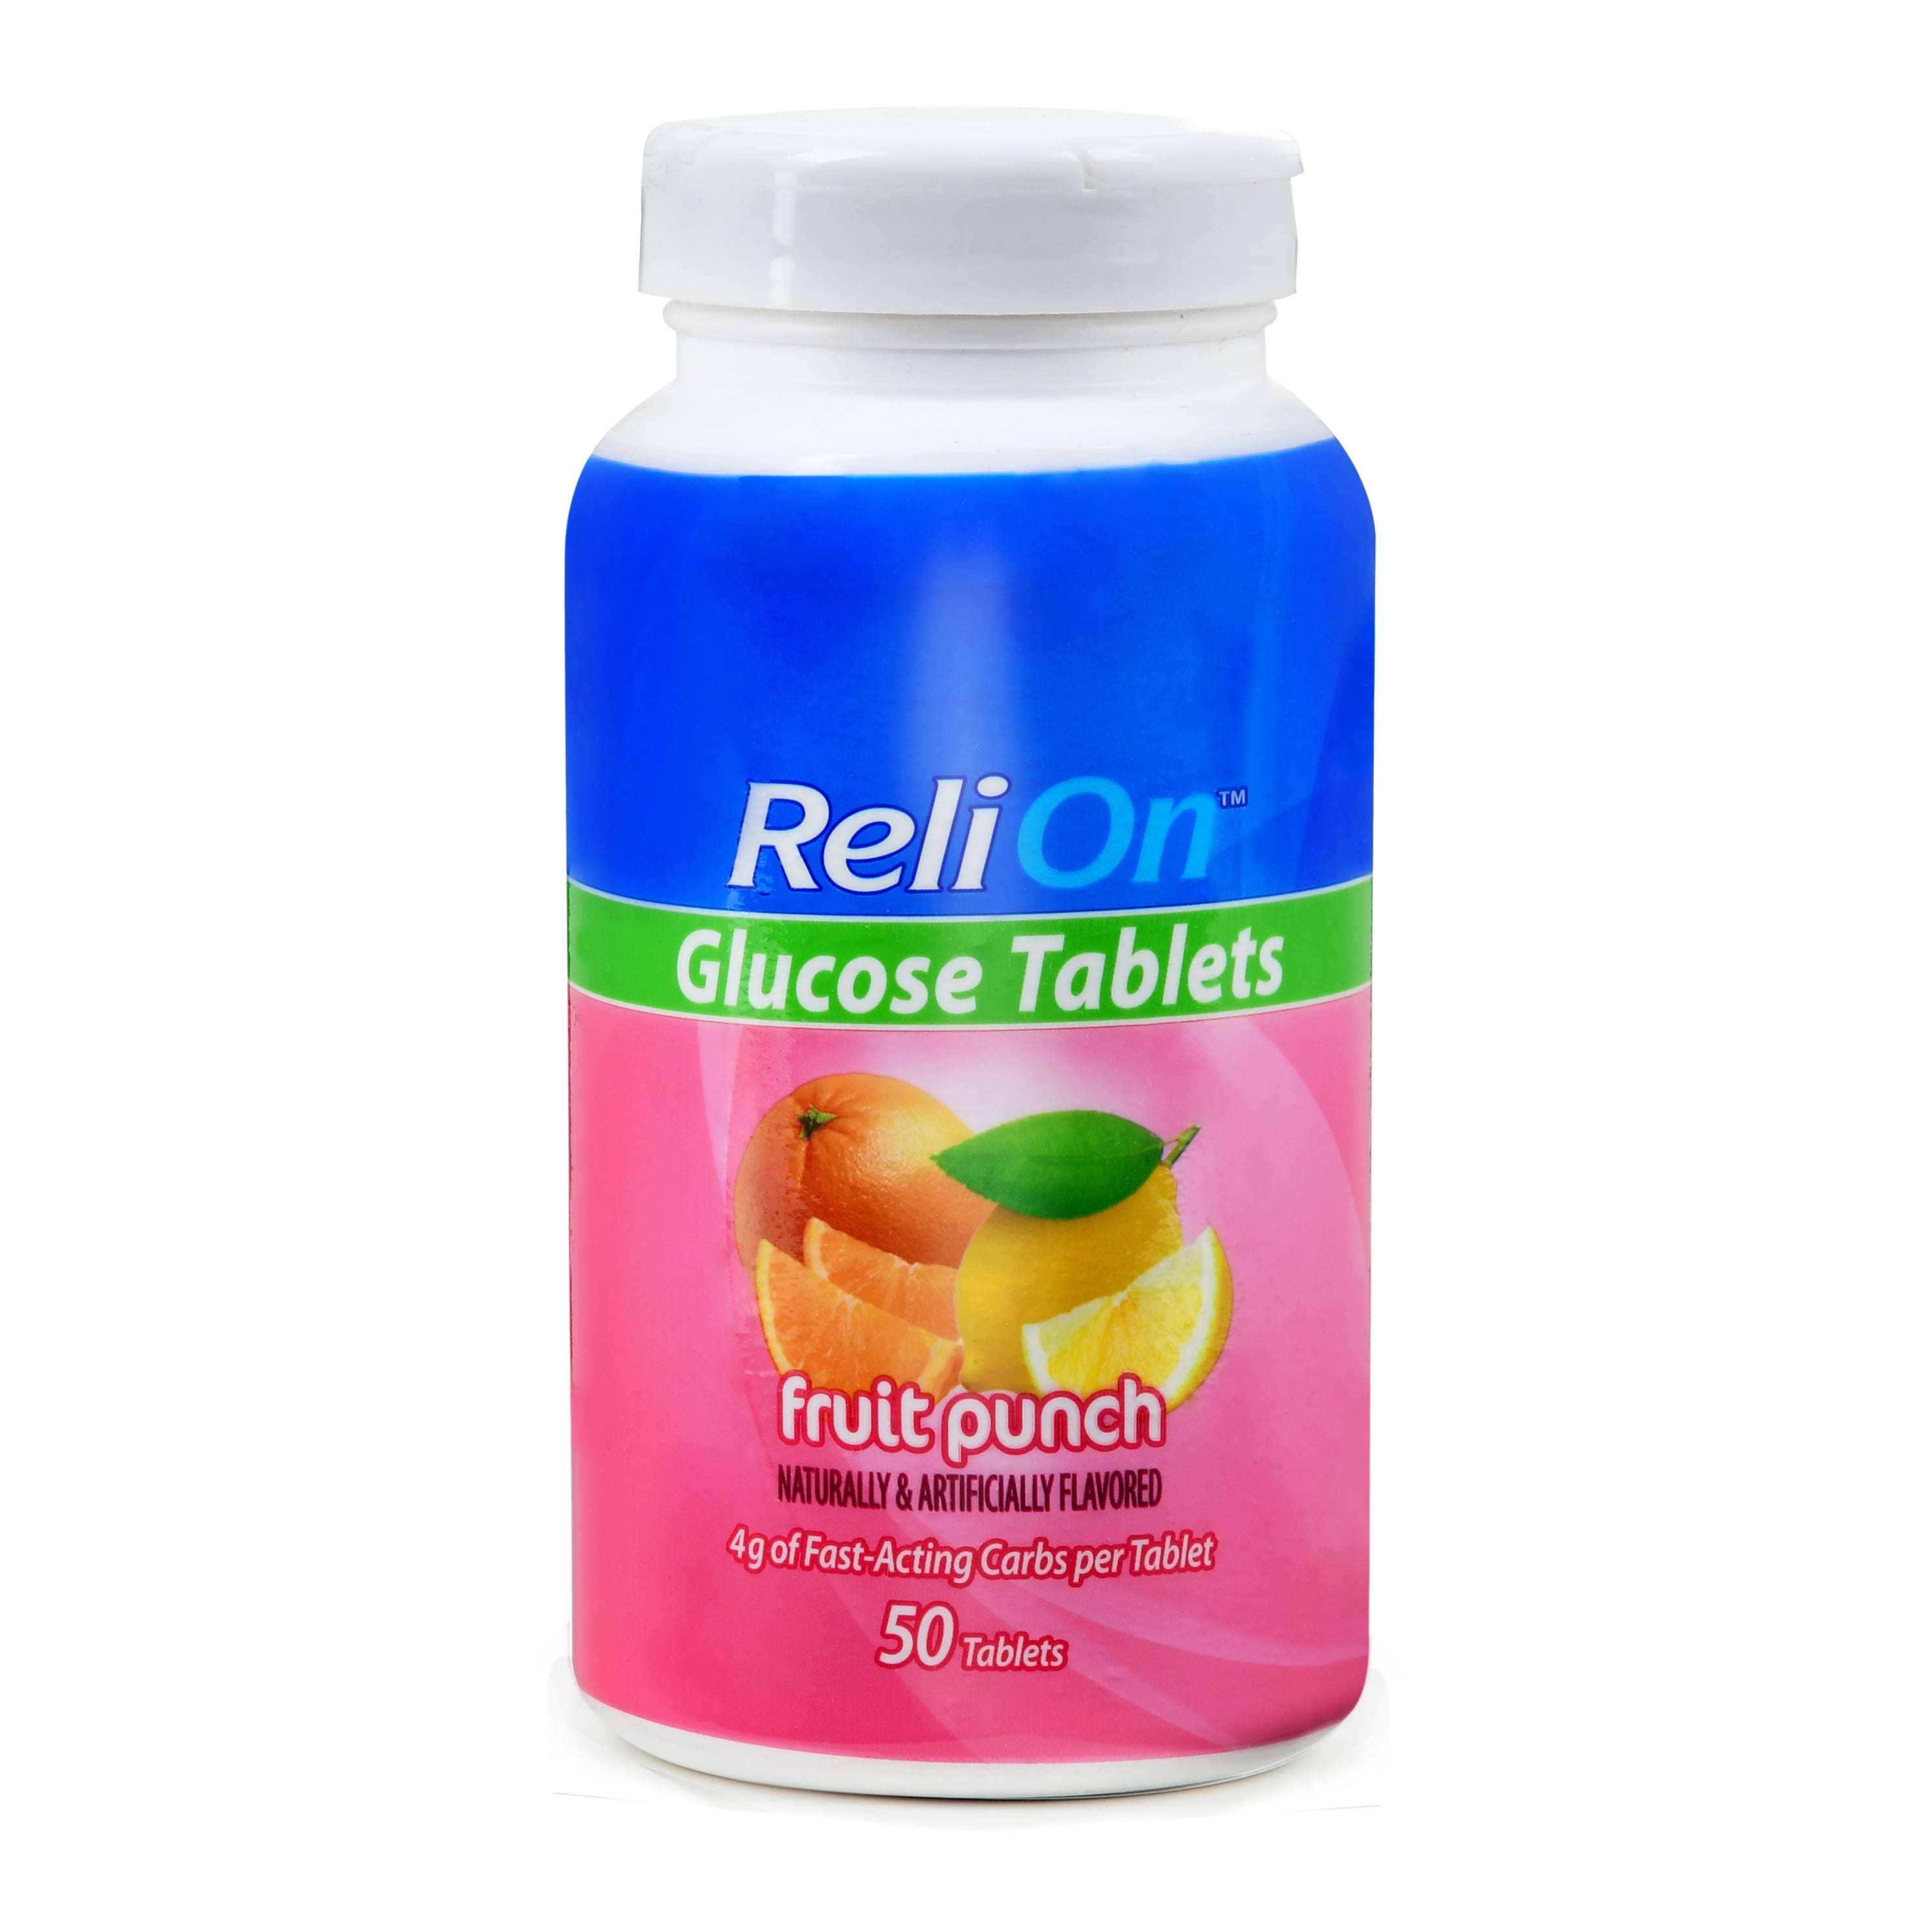 Glucose Tablets In Container Relion Fruit Punch Glucose Tablets 50 Ct Walma...